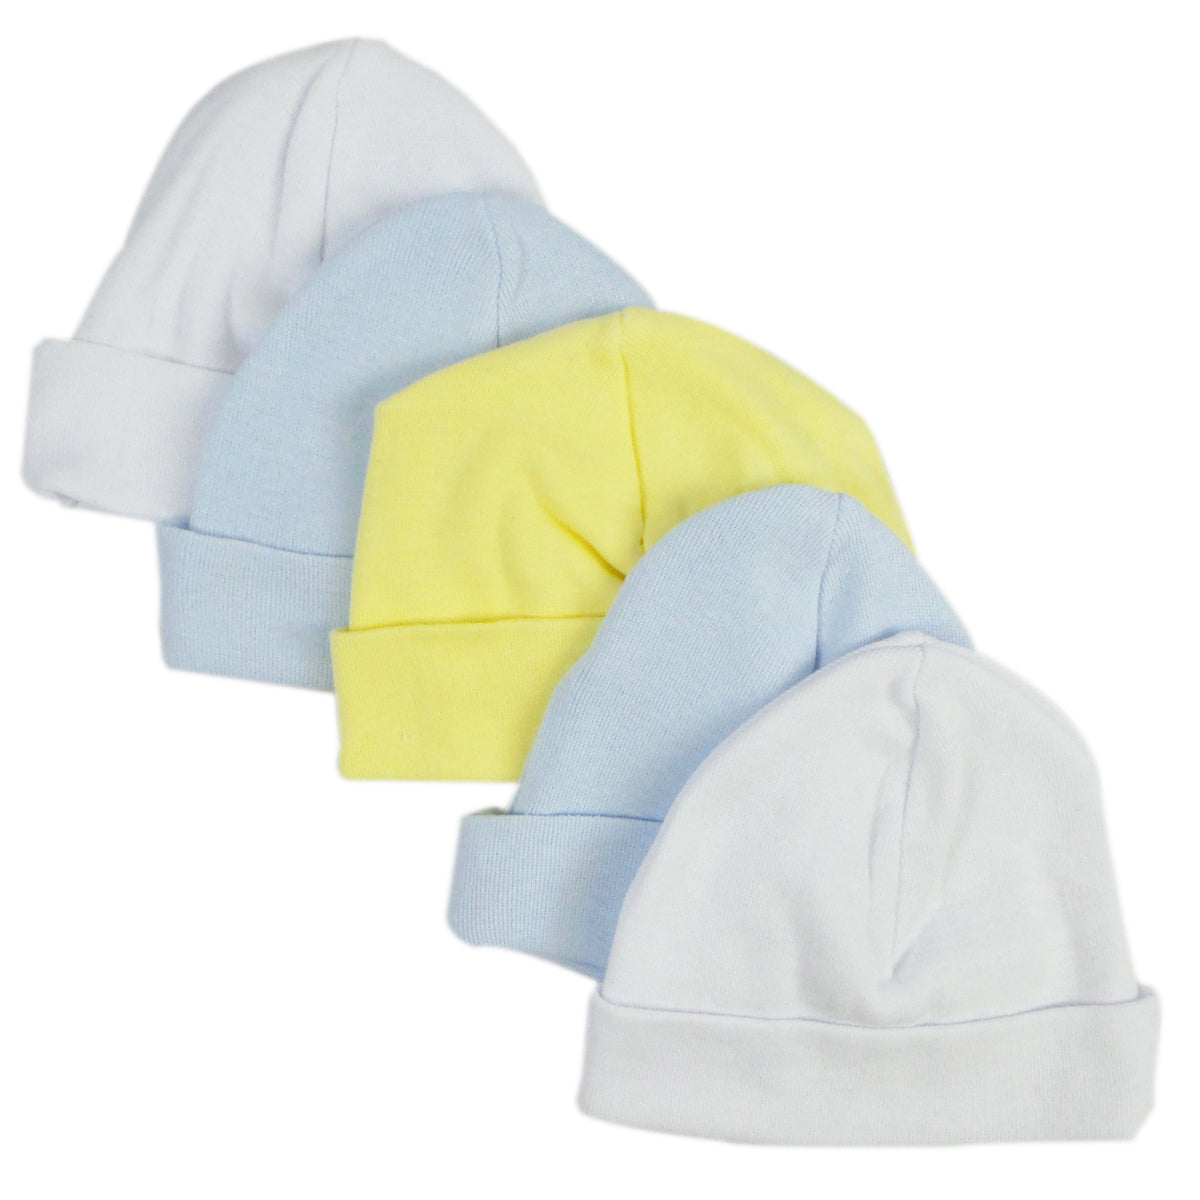 Blue & White Baby Caps (Pack of 5) 031-BLUE-2-W-2-Y-1